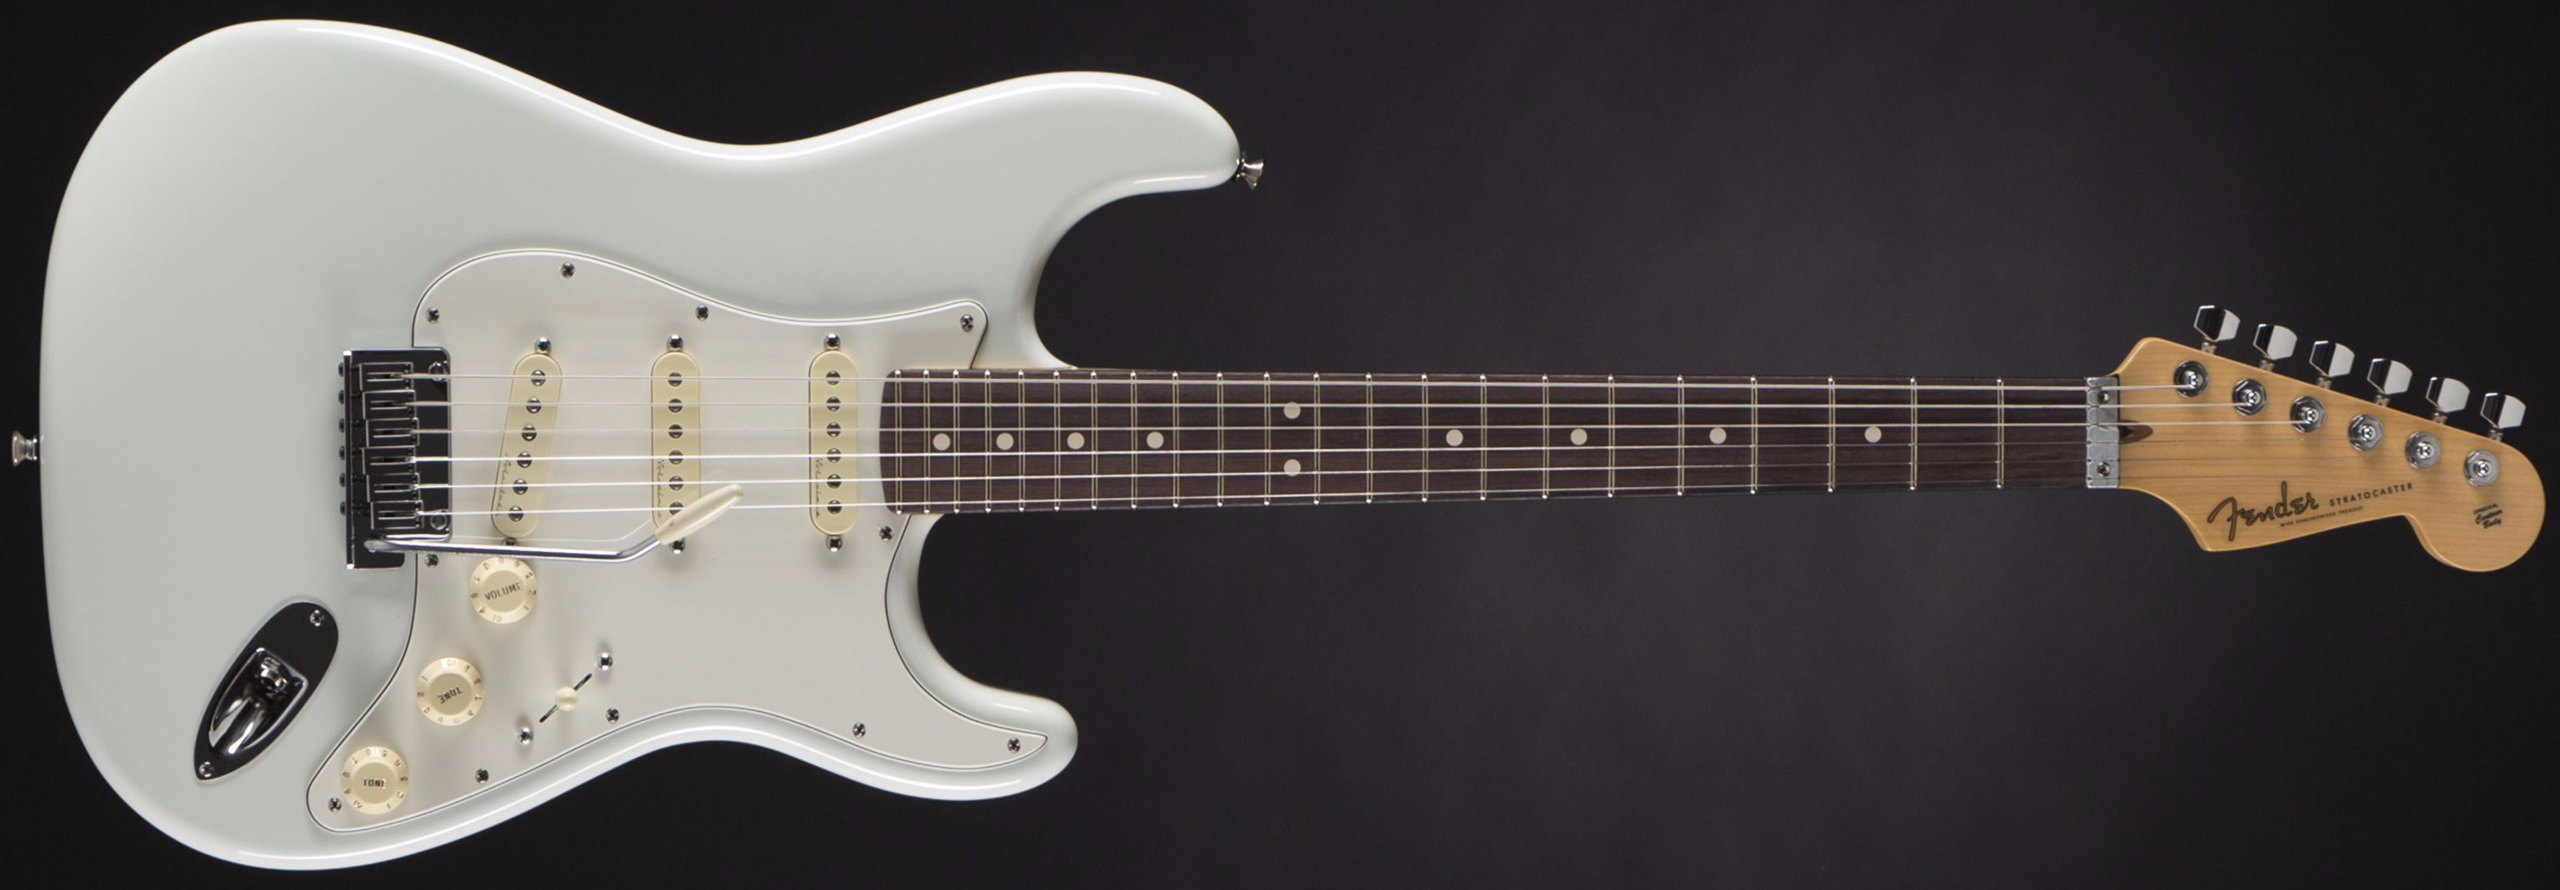 Fender Jeff Beck Signature Stratocaster RW Olympic White Masterbuilt Todd  Krause #10587 | MUSIC STORE professional